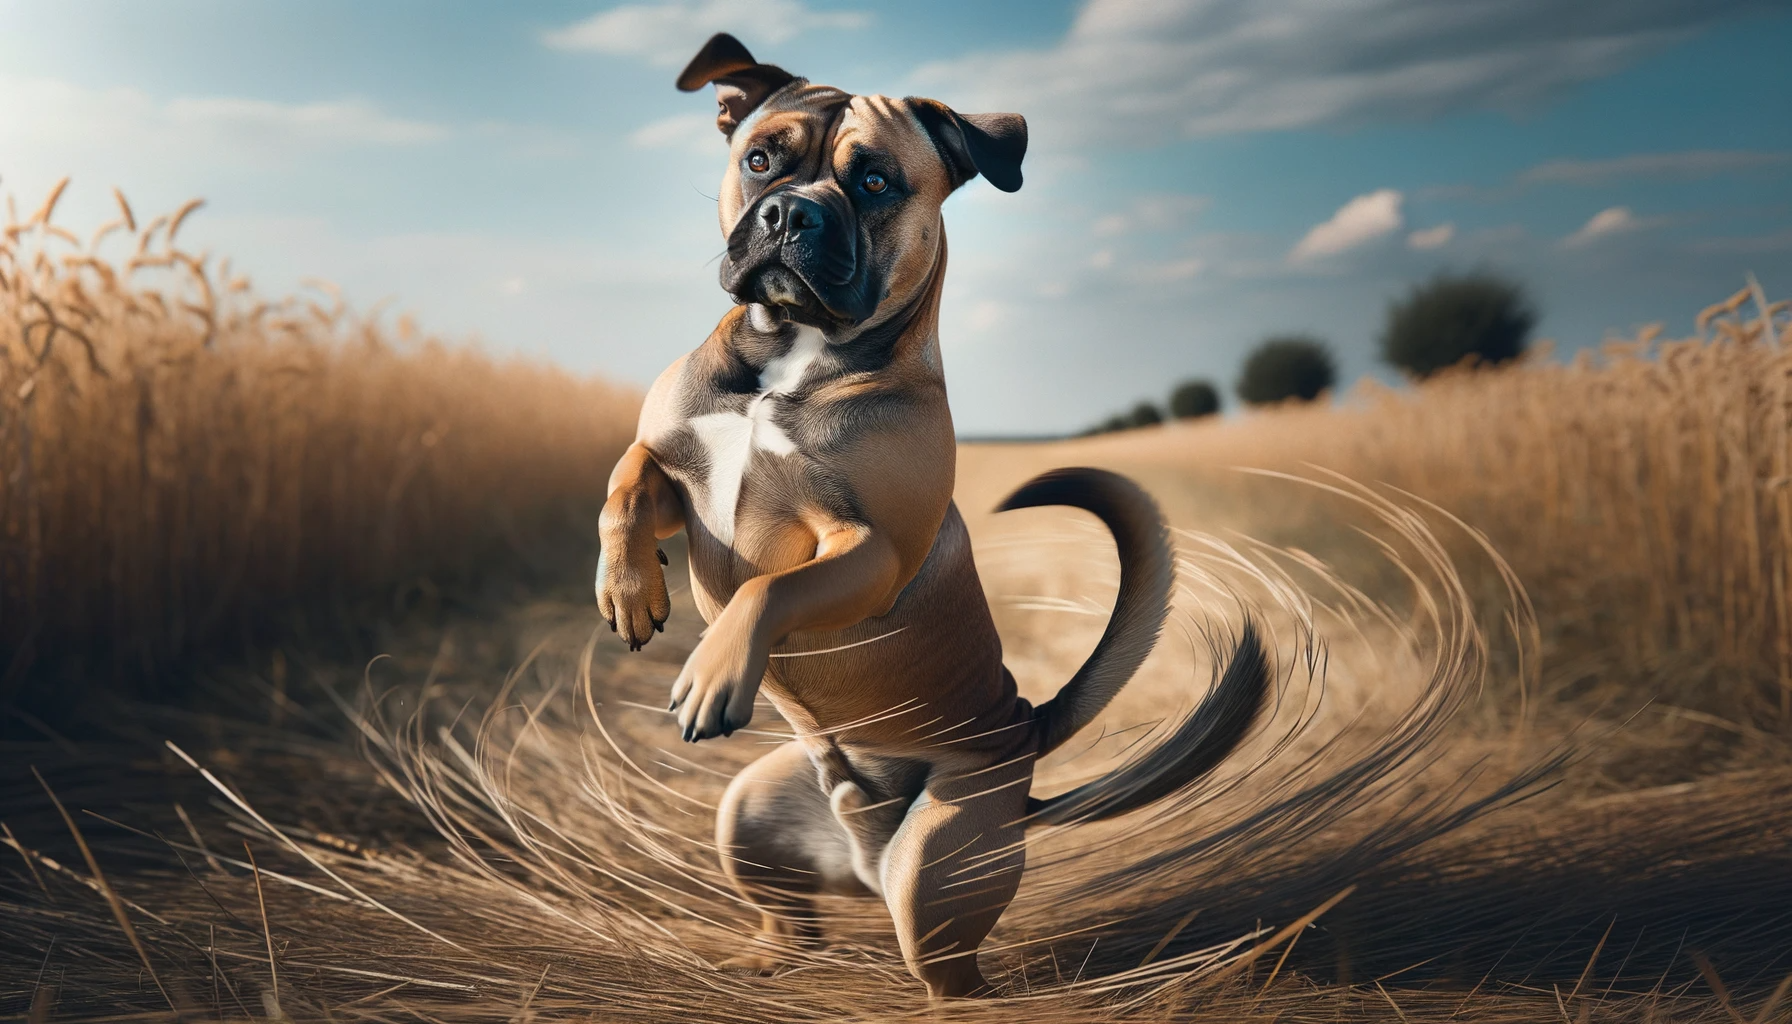 Photo of a smart Bullador dog in an open field performing the 'spin' trick on cue. The dog is captured mid-twirl, its tail and ears in motion, against a backdrop of tall grass and a clear blue sky. The dog's eyes are focused and eager, exemplifying its keen intelligence and trainability.